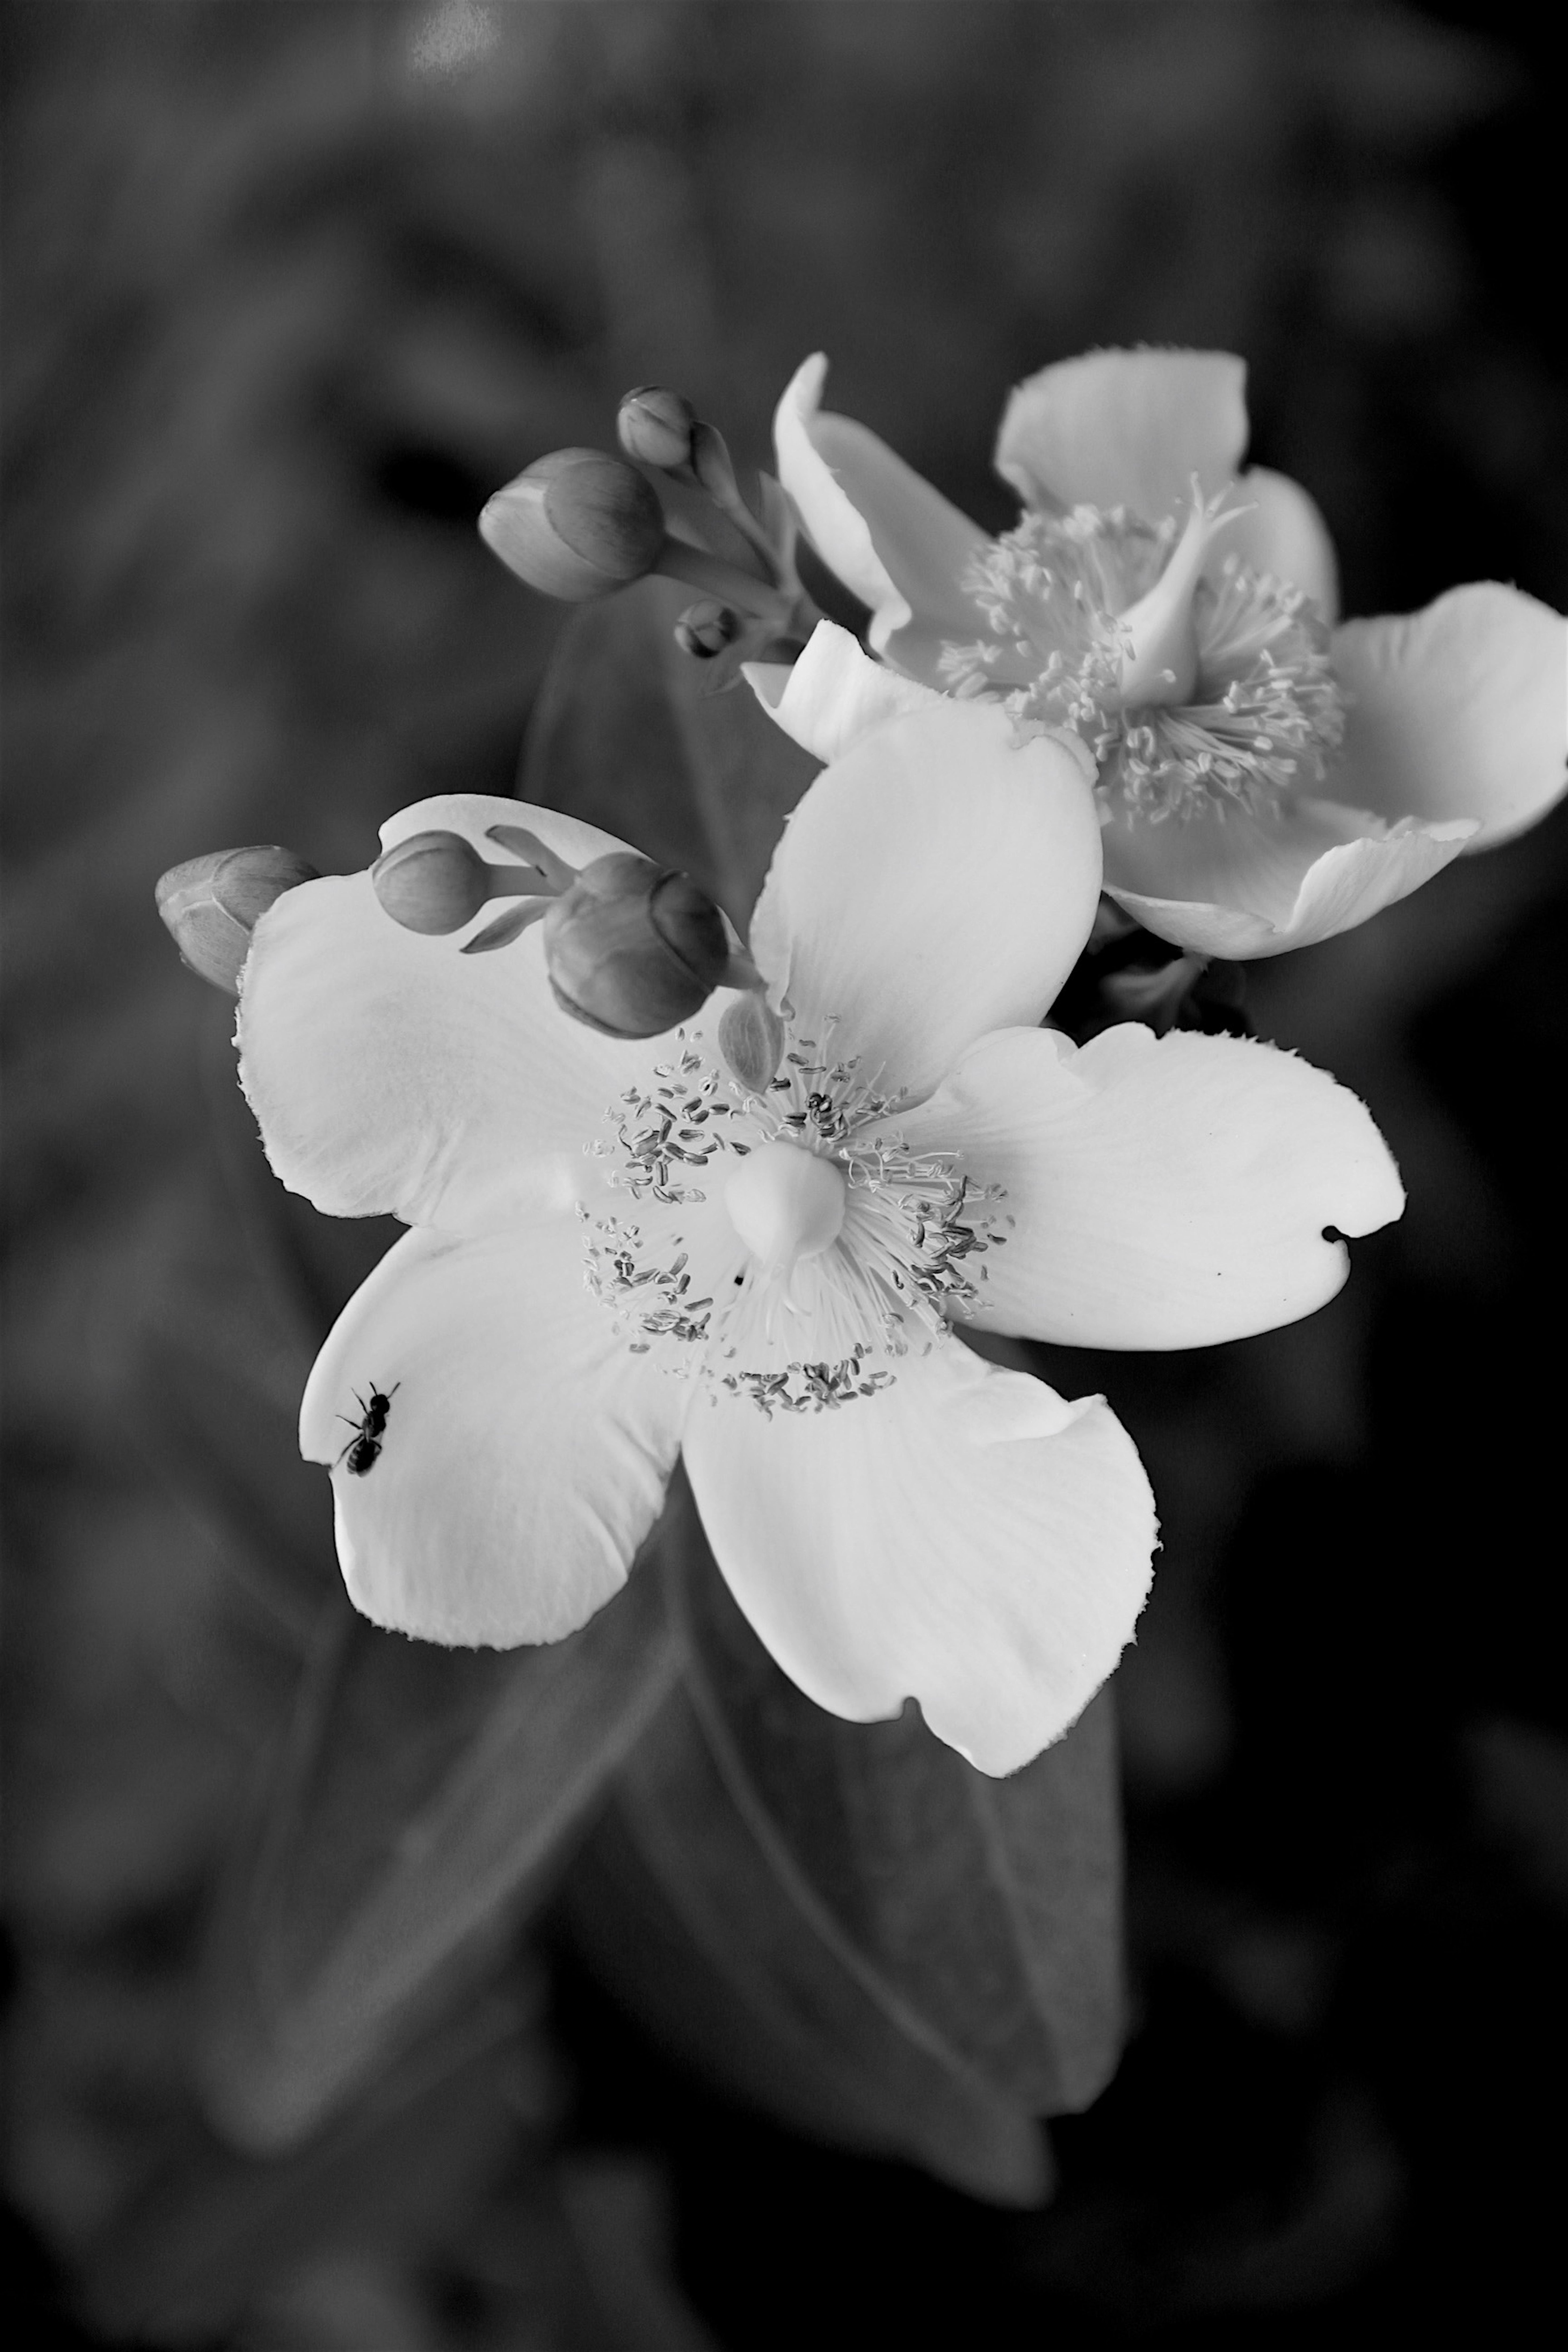 Kat O'Neill Still-Life Photograph - Beauty in Black and White/3